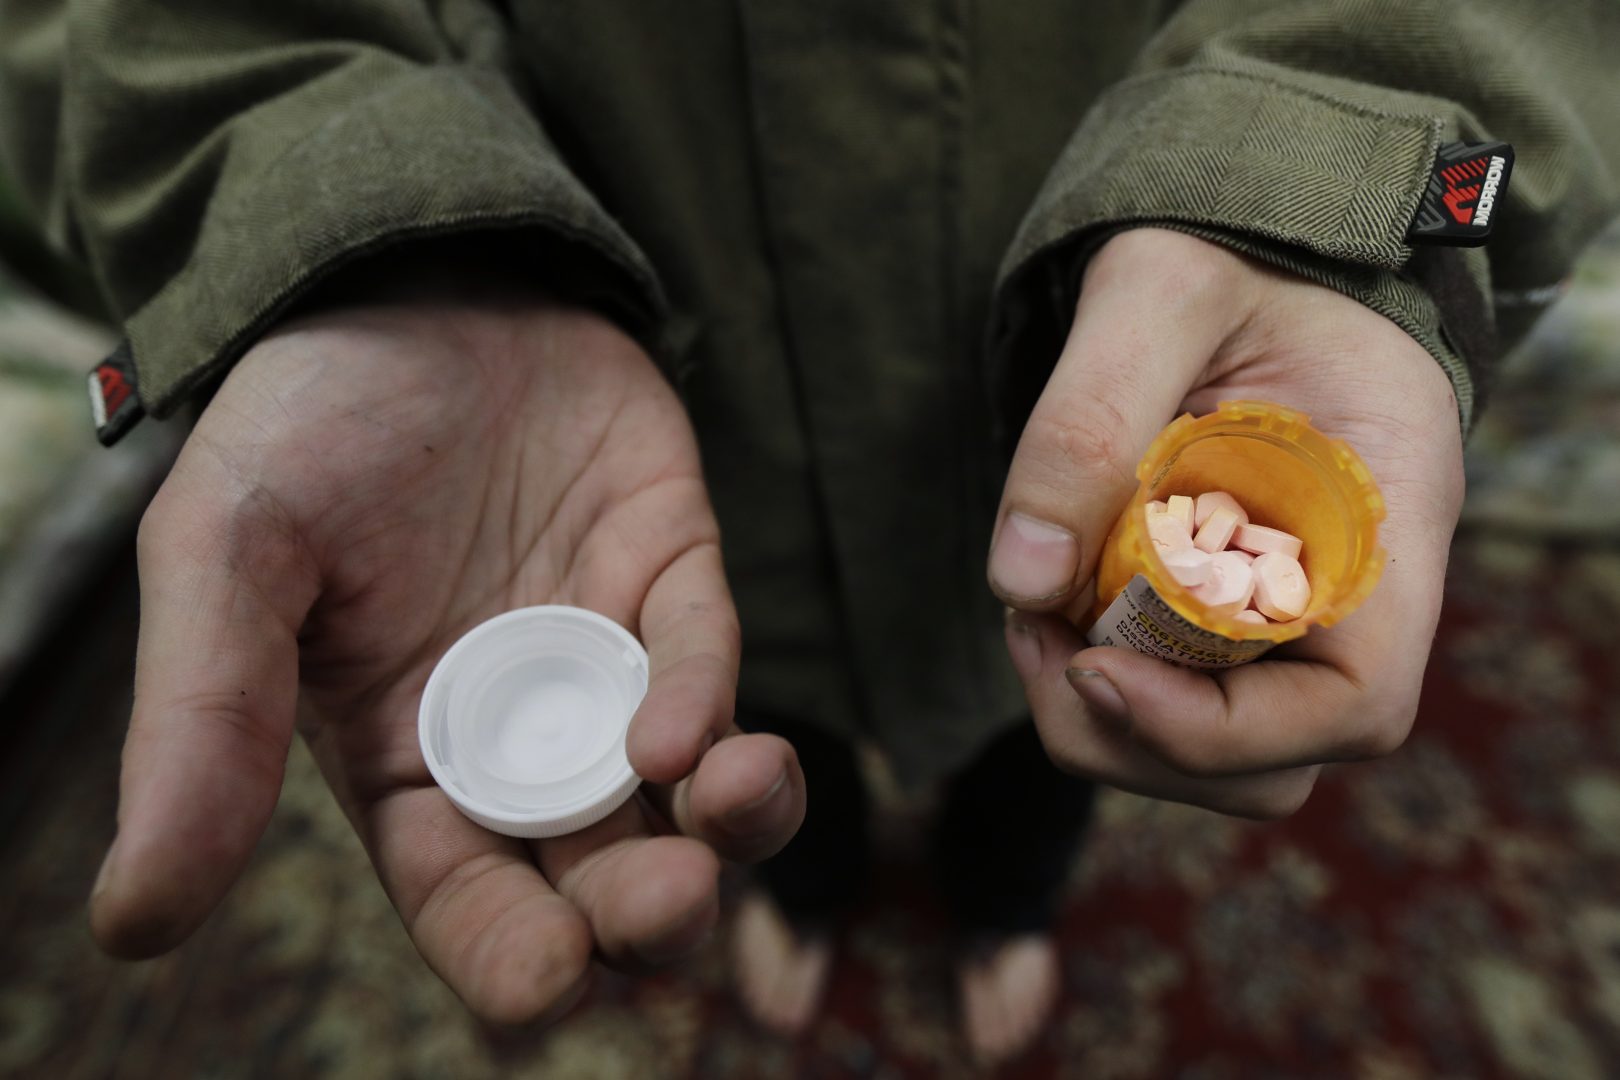 In this Nov. 14, 2019 photo, Jon Combes holds his bottle of buprenorphine, a medicine that prevents withdrawal sickness in people trying to stop using opiates, as he prepares to take a dose in a clinic in Olympia, Wash. The clinic is working to spread a philosophy called 